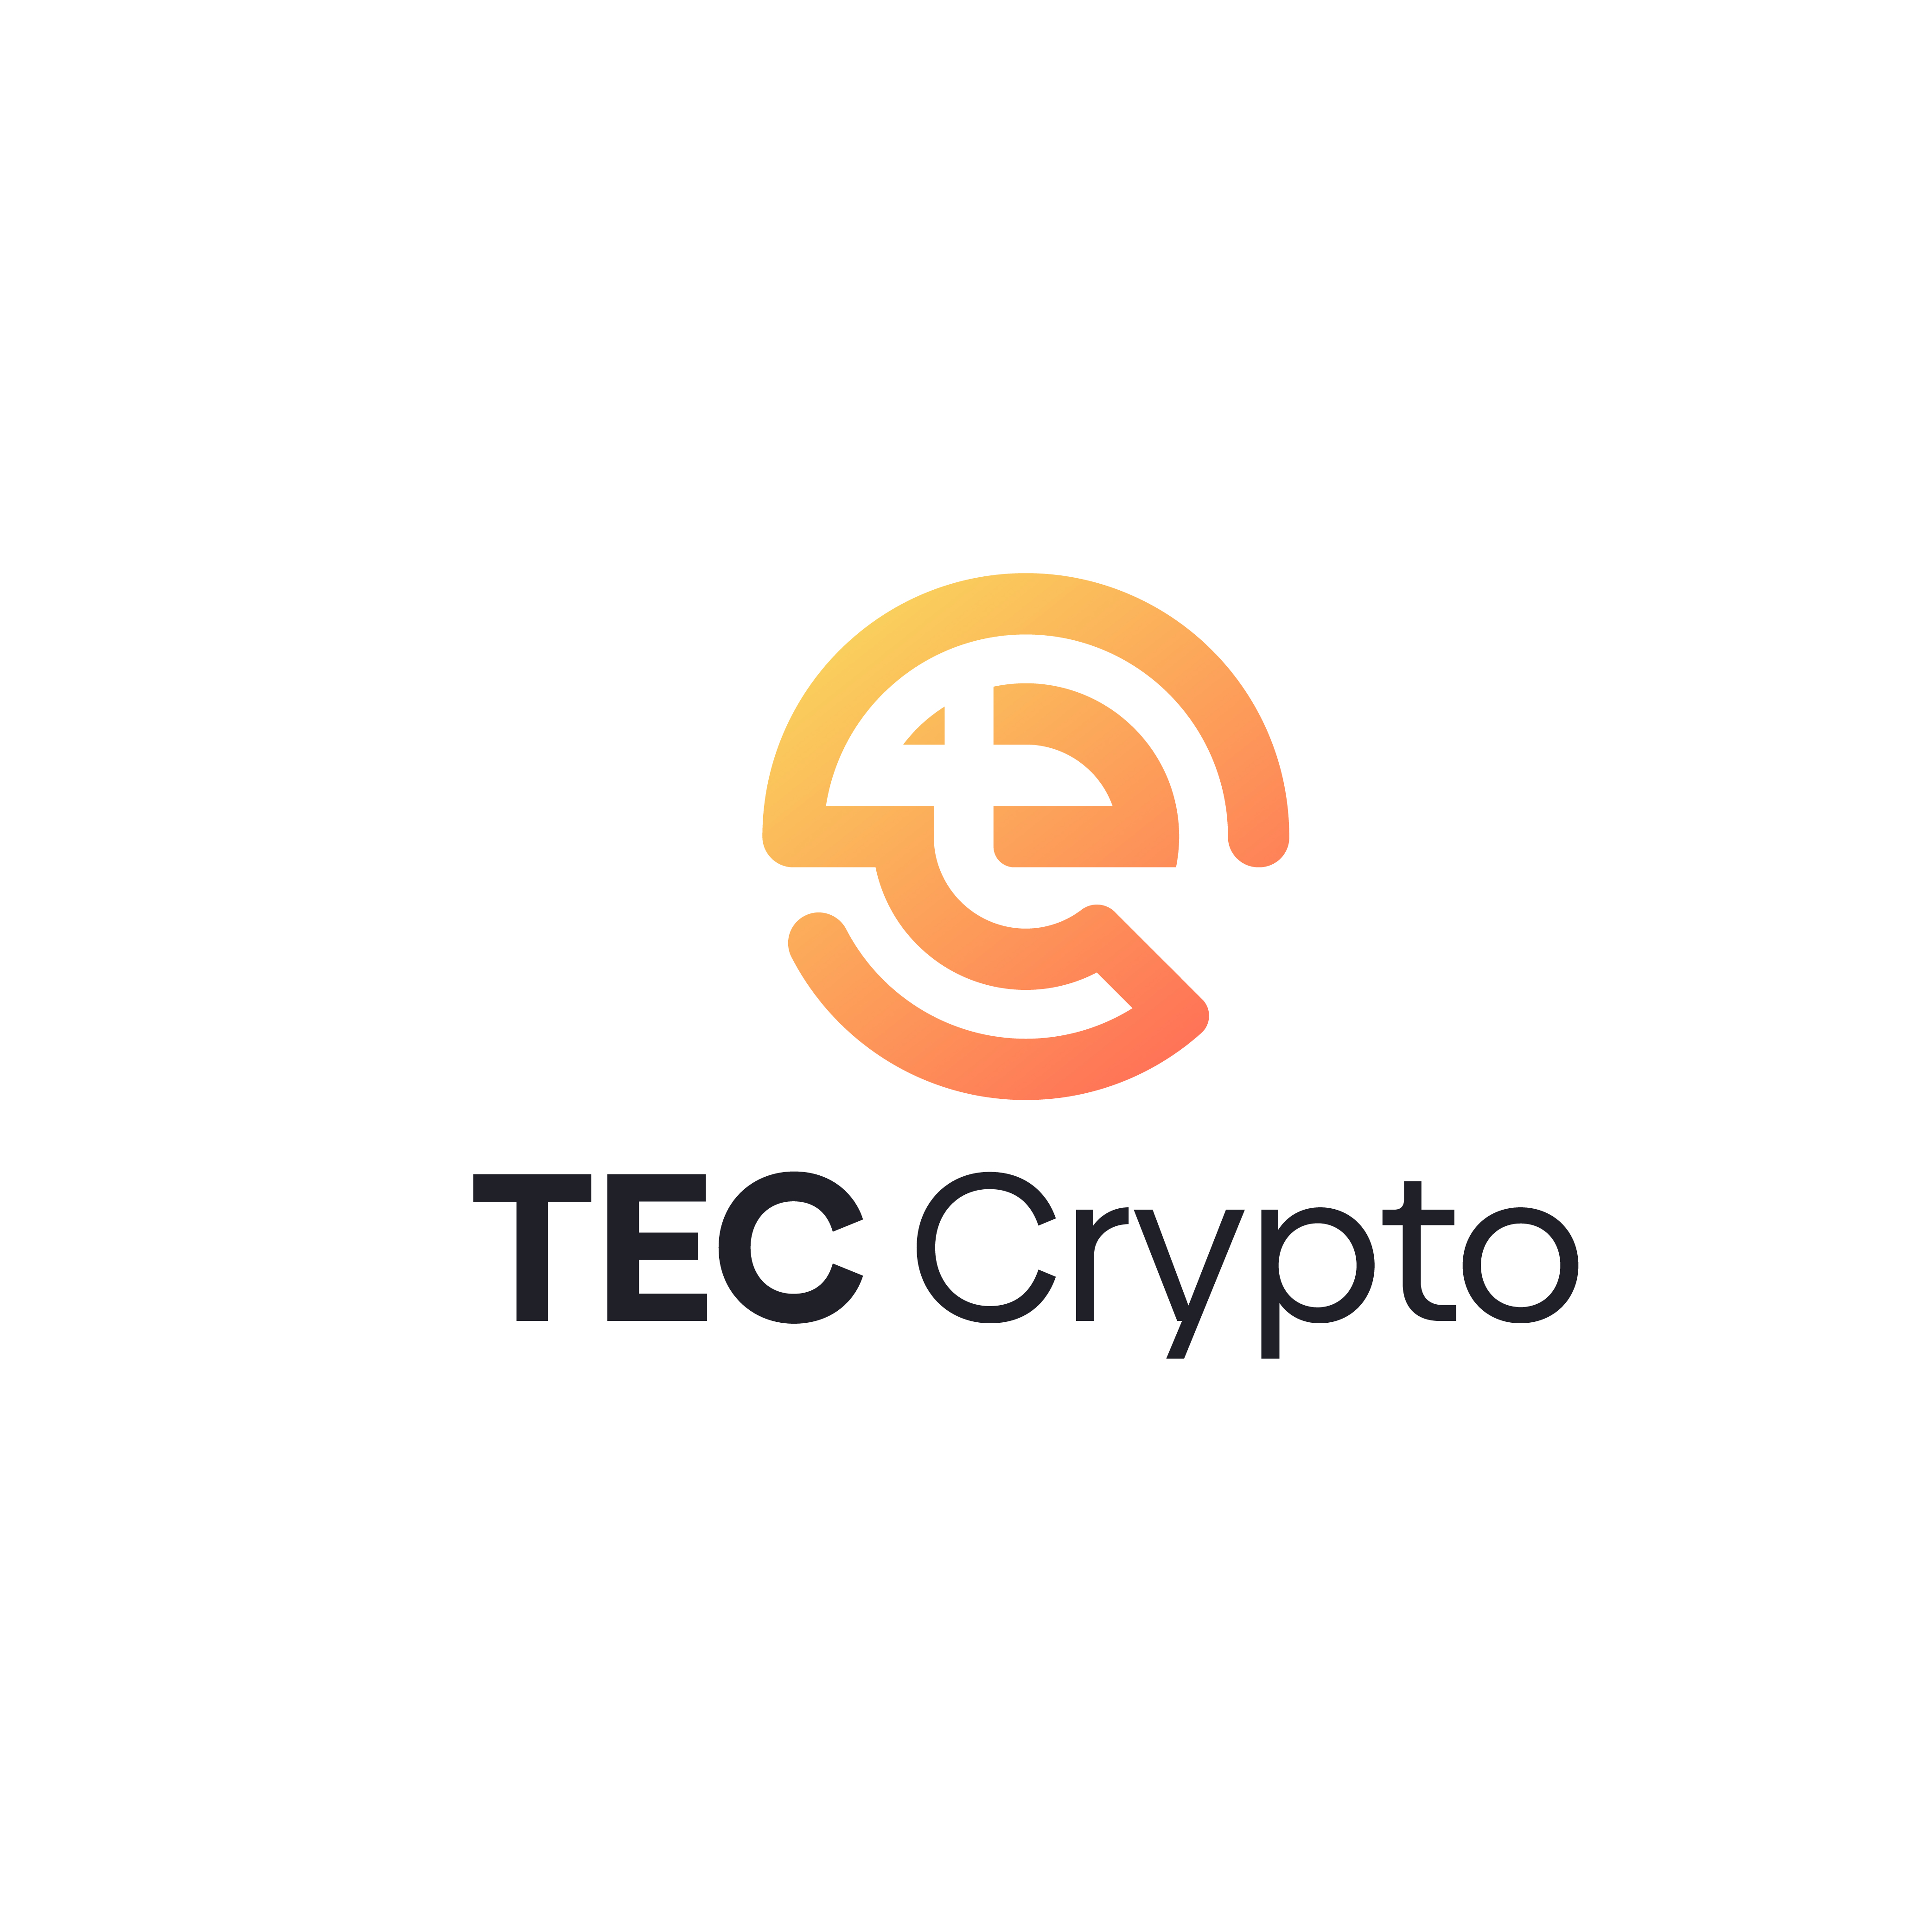 TecCrypto.com Gears Up for Bitcoin Halving - A Milestone Moment for the Mining Industry